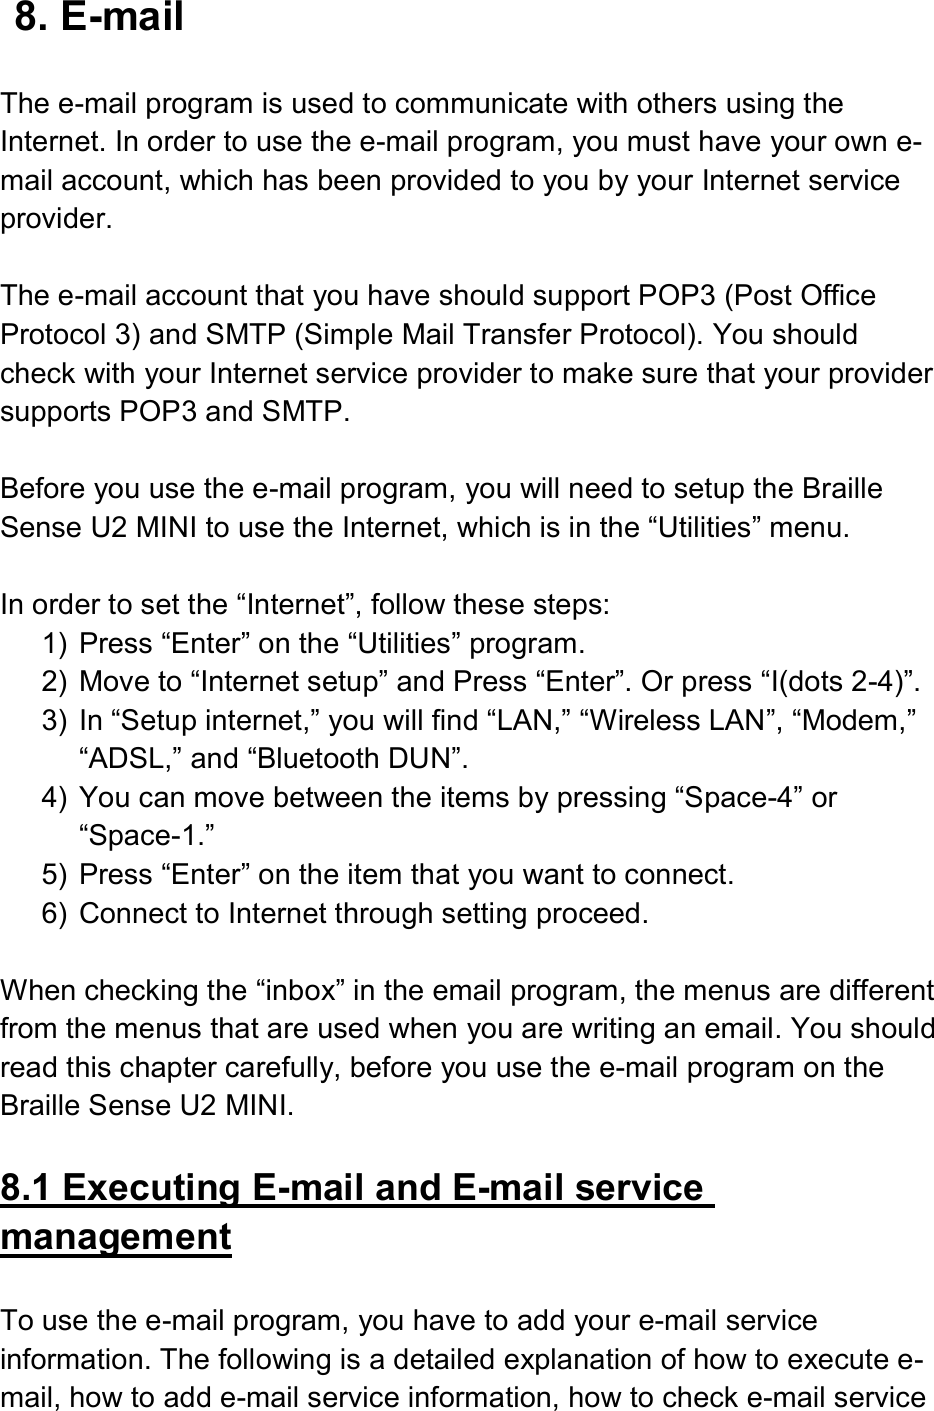  8. E-mail  The e-mail program is used to communicate with others using the Internet. In order to use the e-mail program, you must have your own e-mail account, which has been provided to you by your Internet service provider.  The e-mail account that you have should support POP3 (Post Office Protocol 3) and SMTP (Simple Mail Transfer Protocol). You should check with your Internet service provider to make sure that your provider supports POP3 and SMTP.  Before you use the e-mail program, you will need to setup the Braille Sense U2 MINI to use the Internet, which is in the “Utilities” menu.  In order to set the “Internet”, follow these steps: 1)  Press “Enter” on the “Utilities” program. 2)  Move to “Internet setup” and Press “Enter”. Or press “I(dots 2-4)”. 3)  In “Setup internet,” you will find “LAN,” “Wireless LAN”, “Modem,” “ADSL,” and “Bluetooth DUN”. 4)  You can move between the items by pressing “Space-4” or “Space-1.” 5)  Press “Enter” on the item that you want to connect. 6)  Connect to Internet through setting proceed.  When checking the “inbox” in the email program, the menus are different from the menus that are used when you are writing an email. You should read this chapter carefully, before you use the e-mail program on the Braille Sense U2 MINI.  8.1 Executing E-mail and E-mail service management  To use the e-mail program, you have to add your e-mail service information. The following is a detailed explanation of how to execute e-mail, how to add e-mail service information, how to check e-mail service 